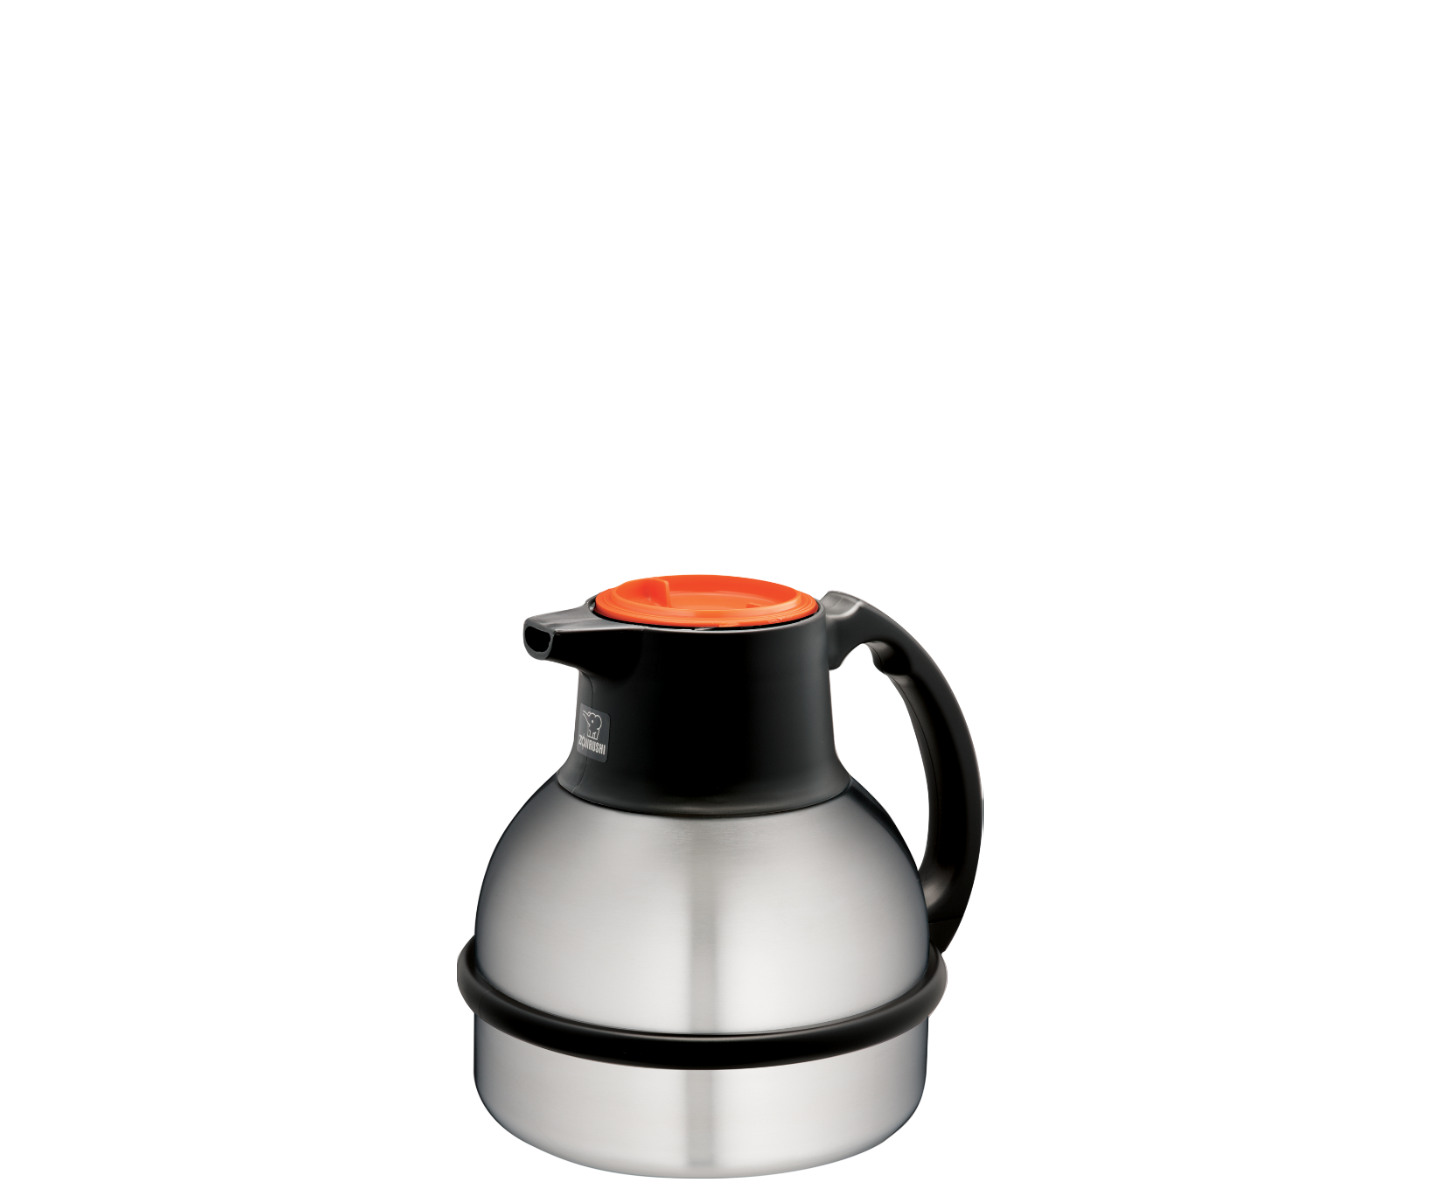 SH-DE19ABX (Stainless Steel with Orange Decaf Lid)